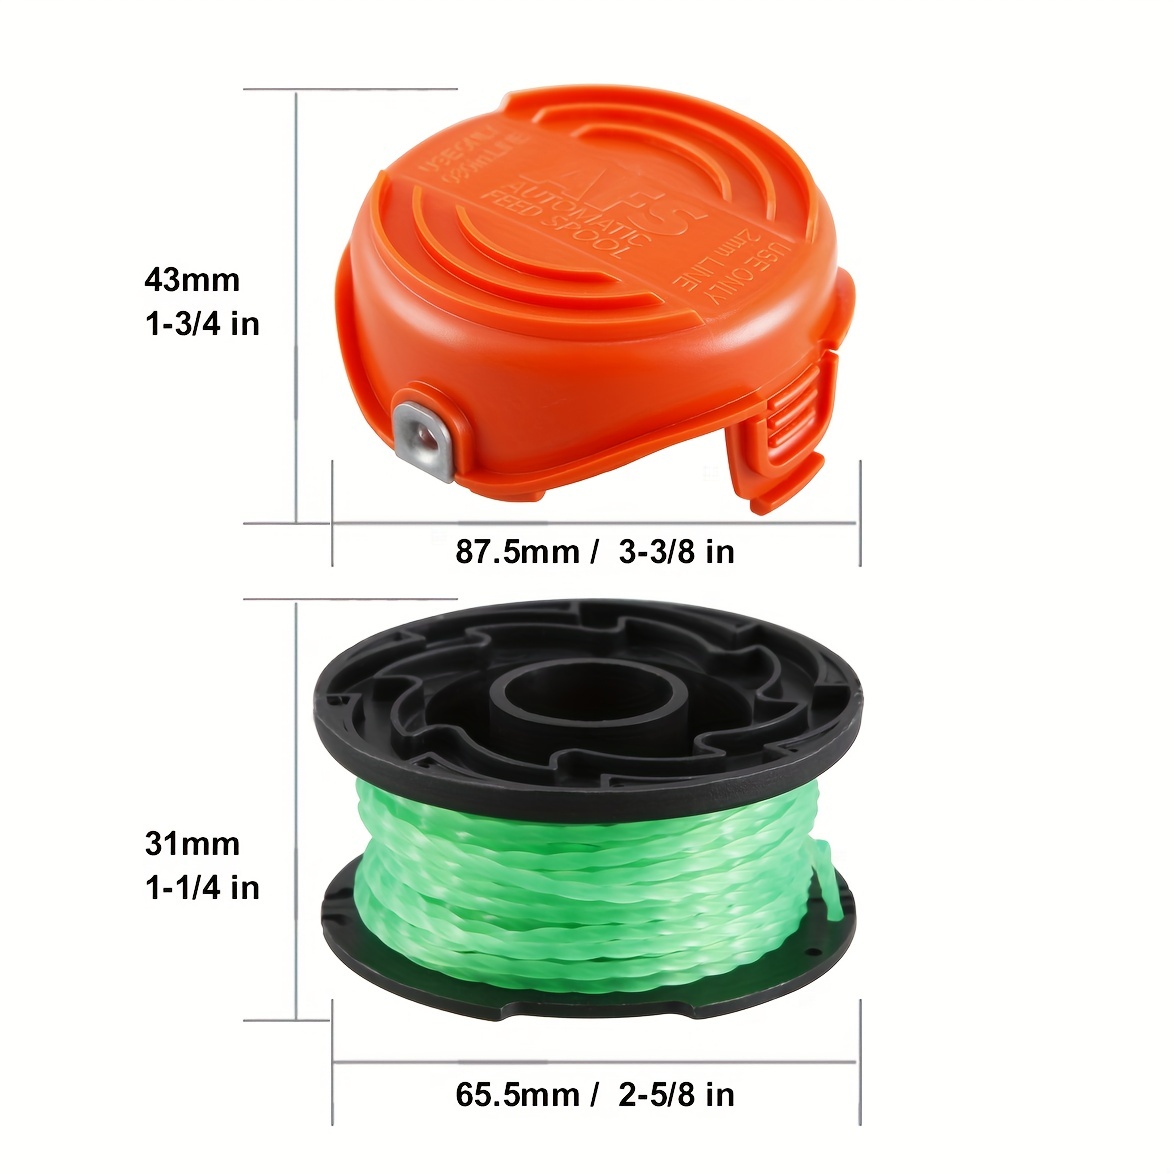 90583594 Replacement Spool Caps Assembly Compatible With For Black+Decker  GH3000 String Trimmer(4 Pack)